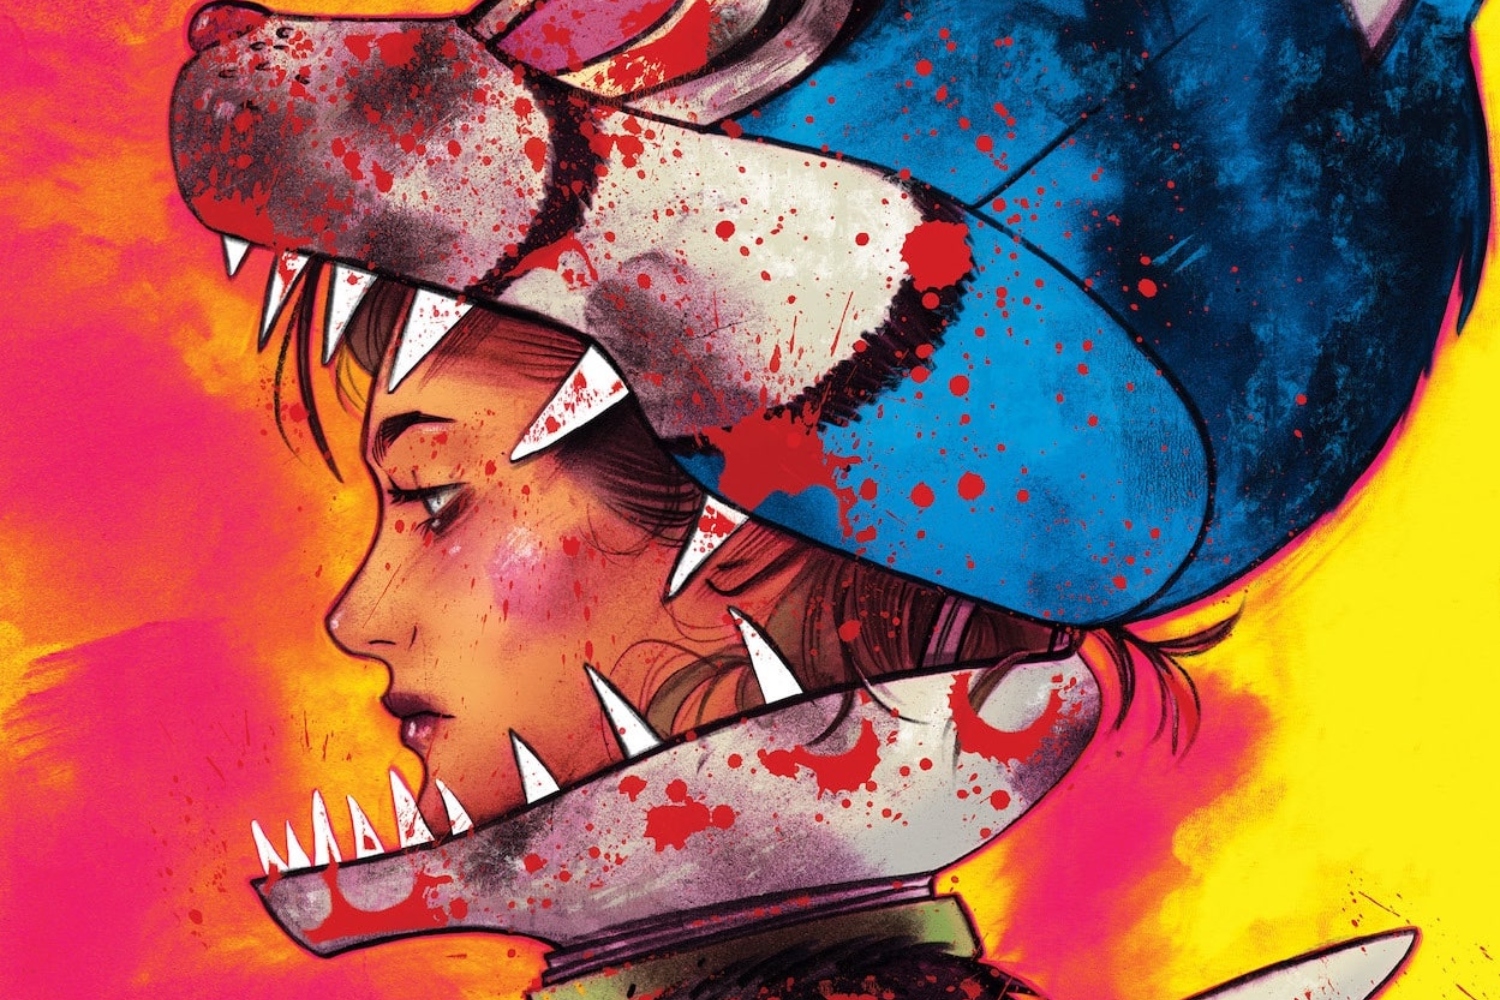 'Plush' #1 explores murder and furries in new 'materials' series